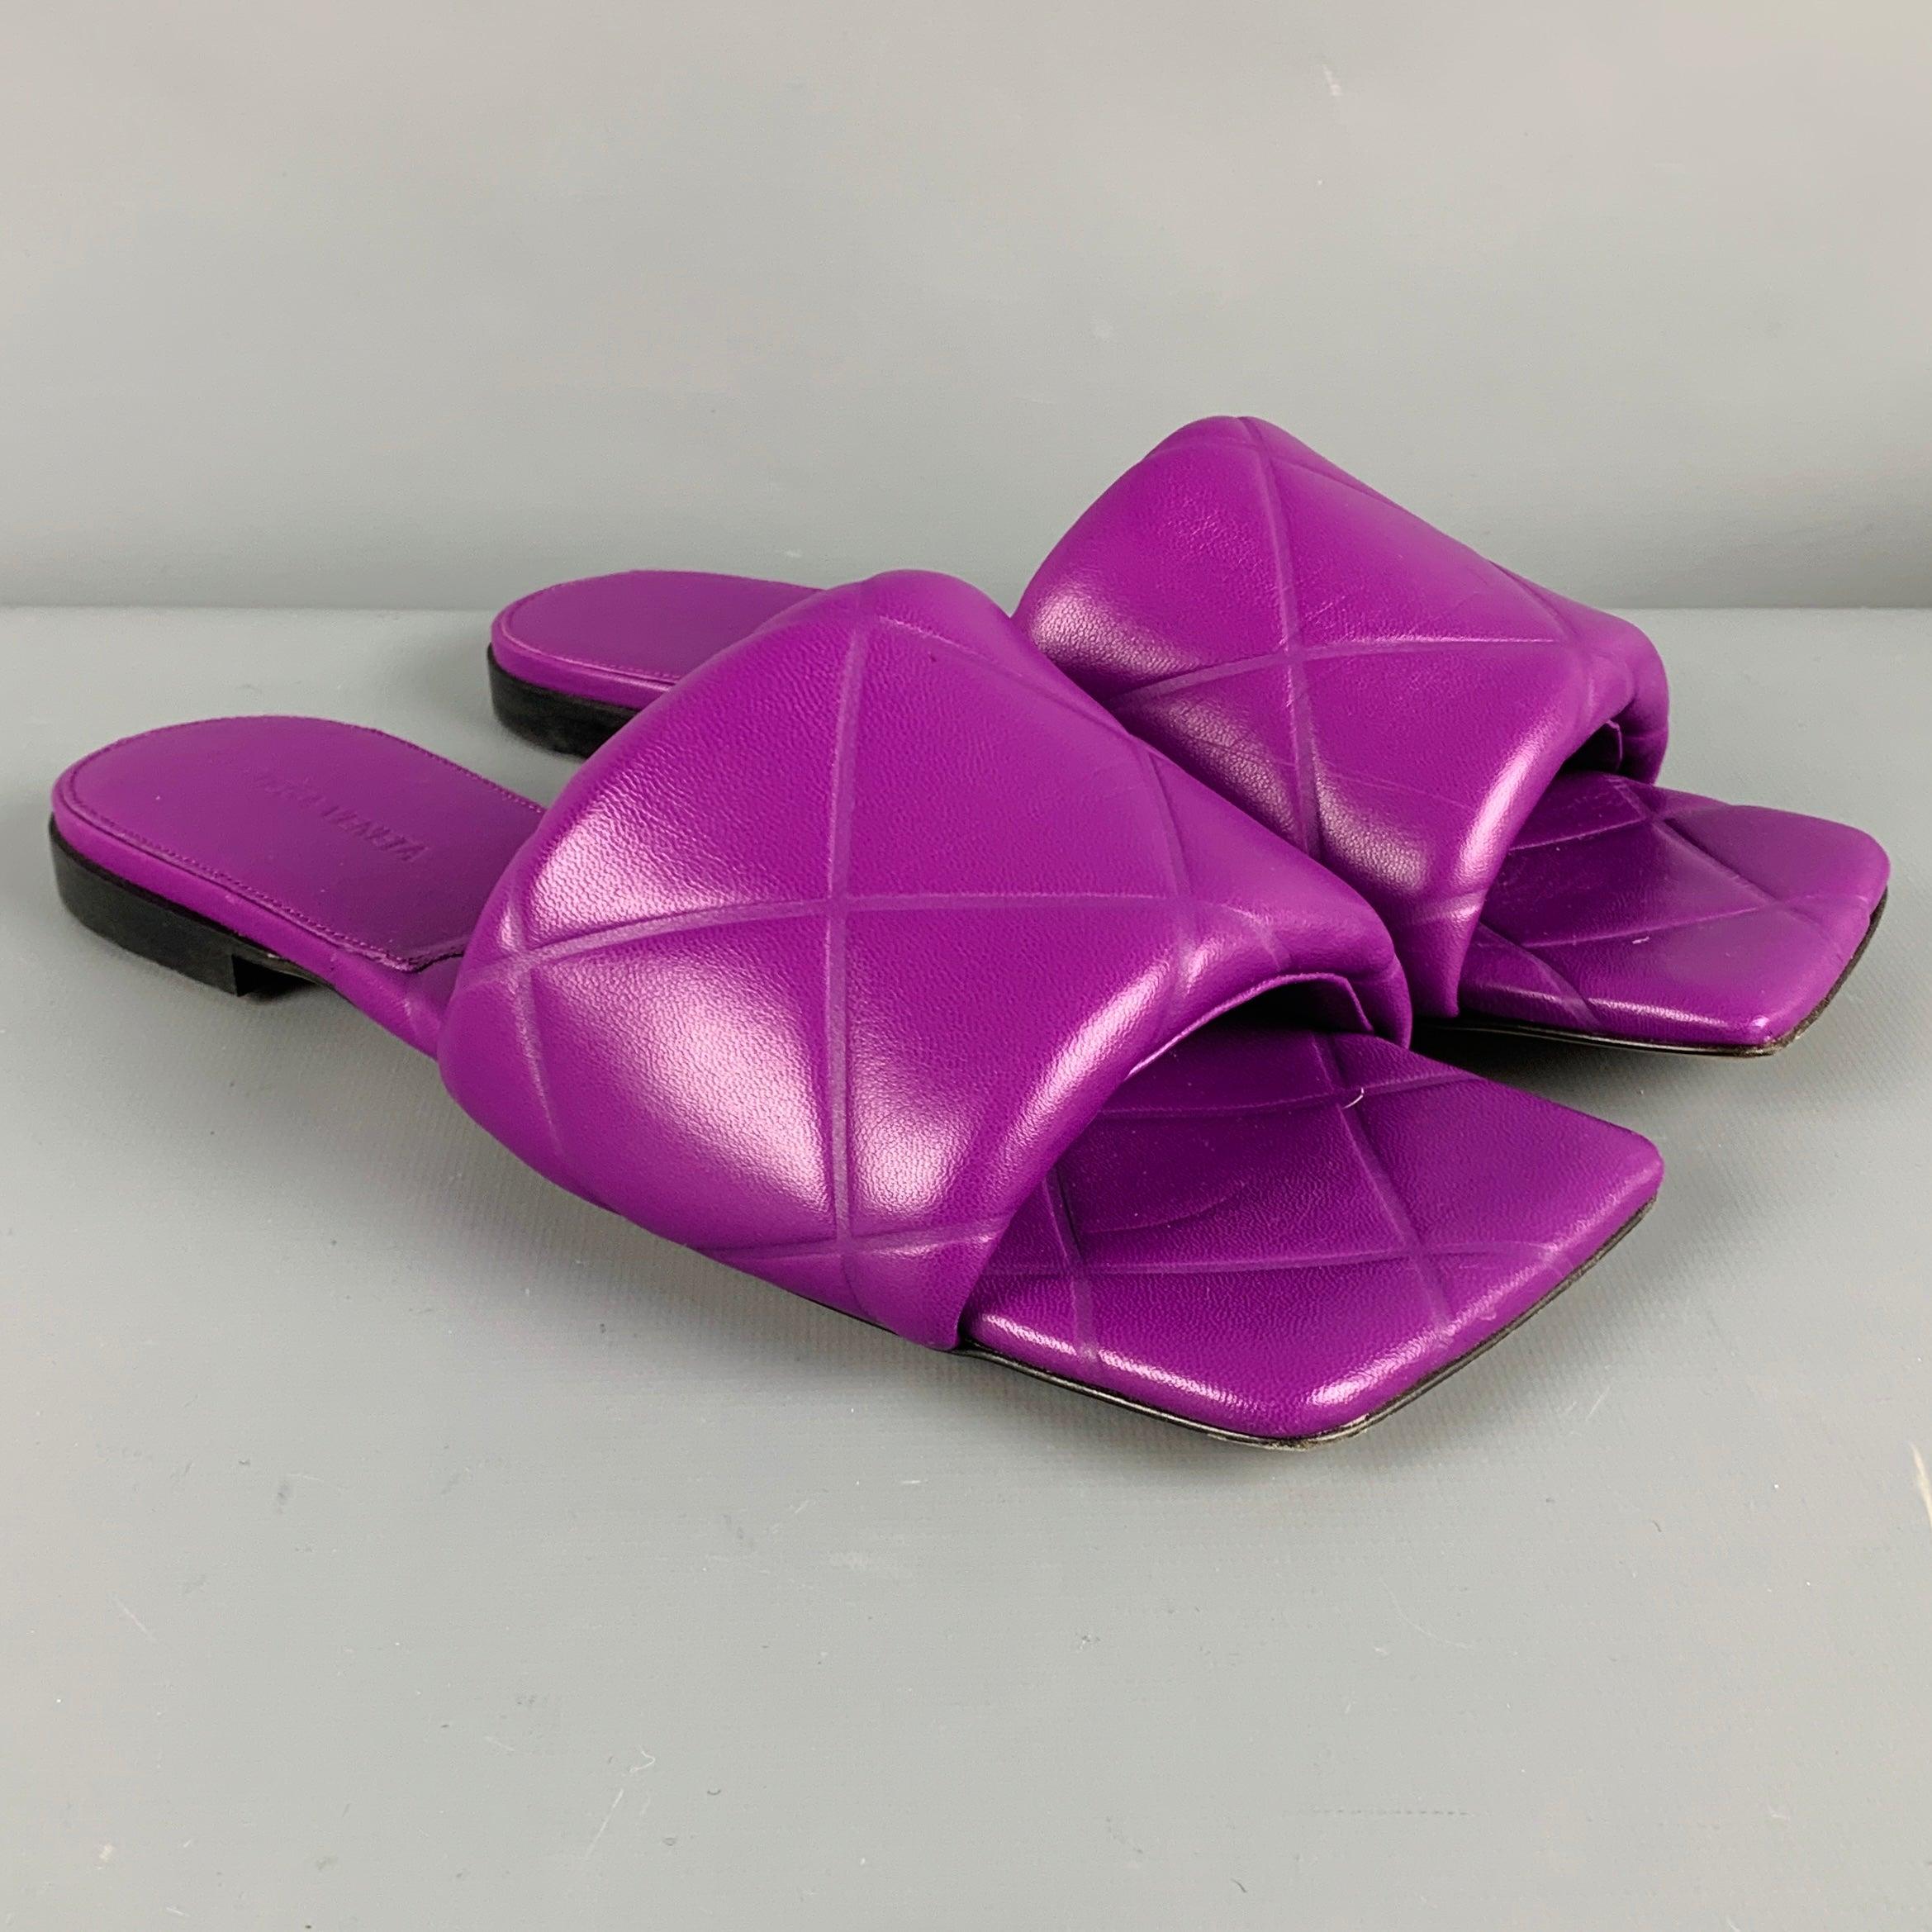 BOTTEGA VENETA sandals in a
purple leather featuring a quilted style, square toe, and slip on closure. Made in Italy.Very Good Pre-Owned Condition. Minor signs of wear. 

Marked:   40Outsole: 10.25 inches  x 4 inches 
  
  
 
Reference No.: